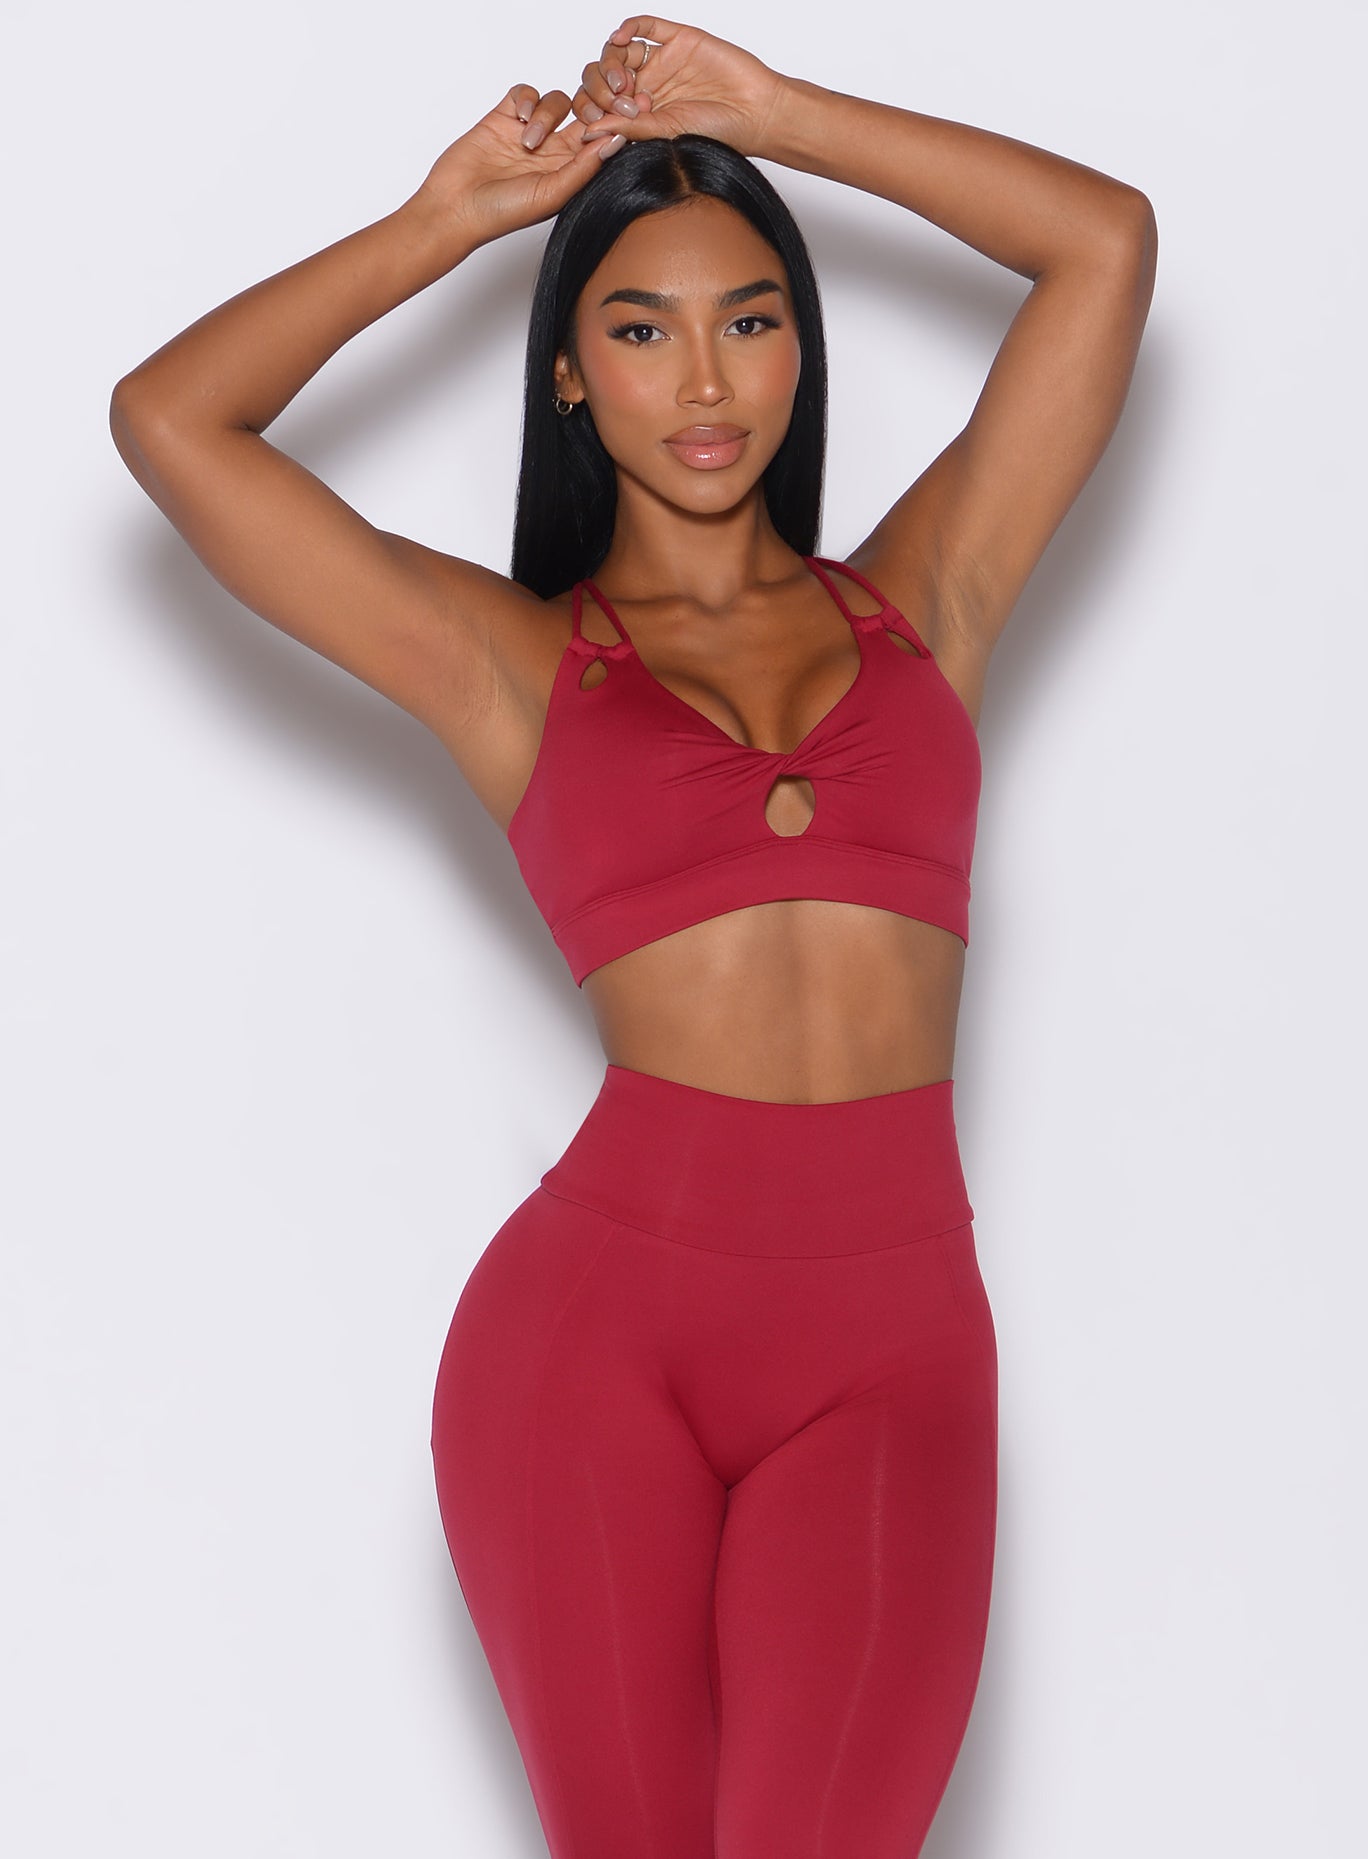 Front profile view of a model with her hands over her head wearing our twist sports bra in maroon color along with a matching leggings